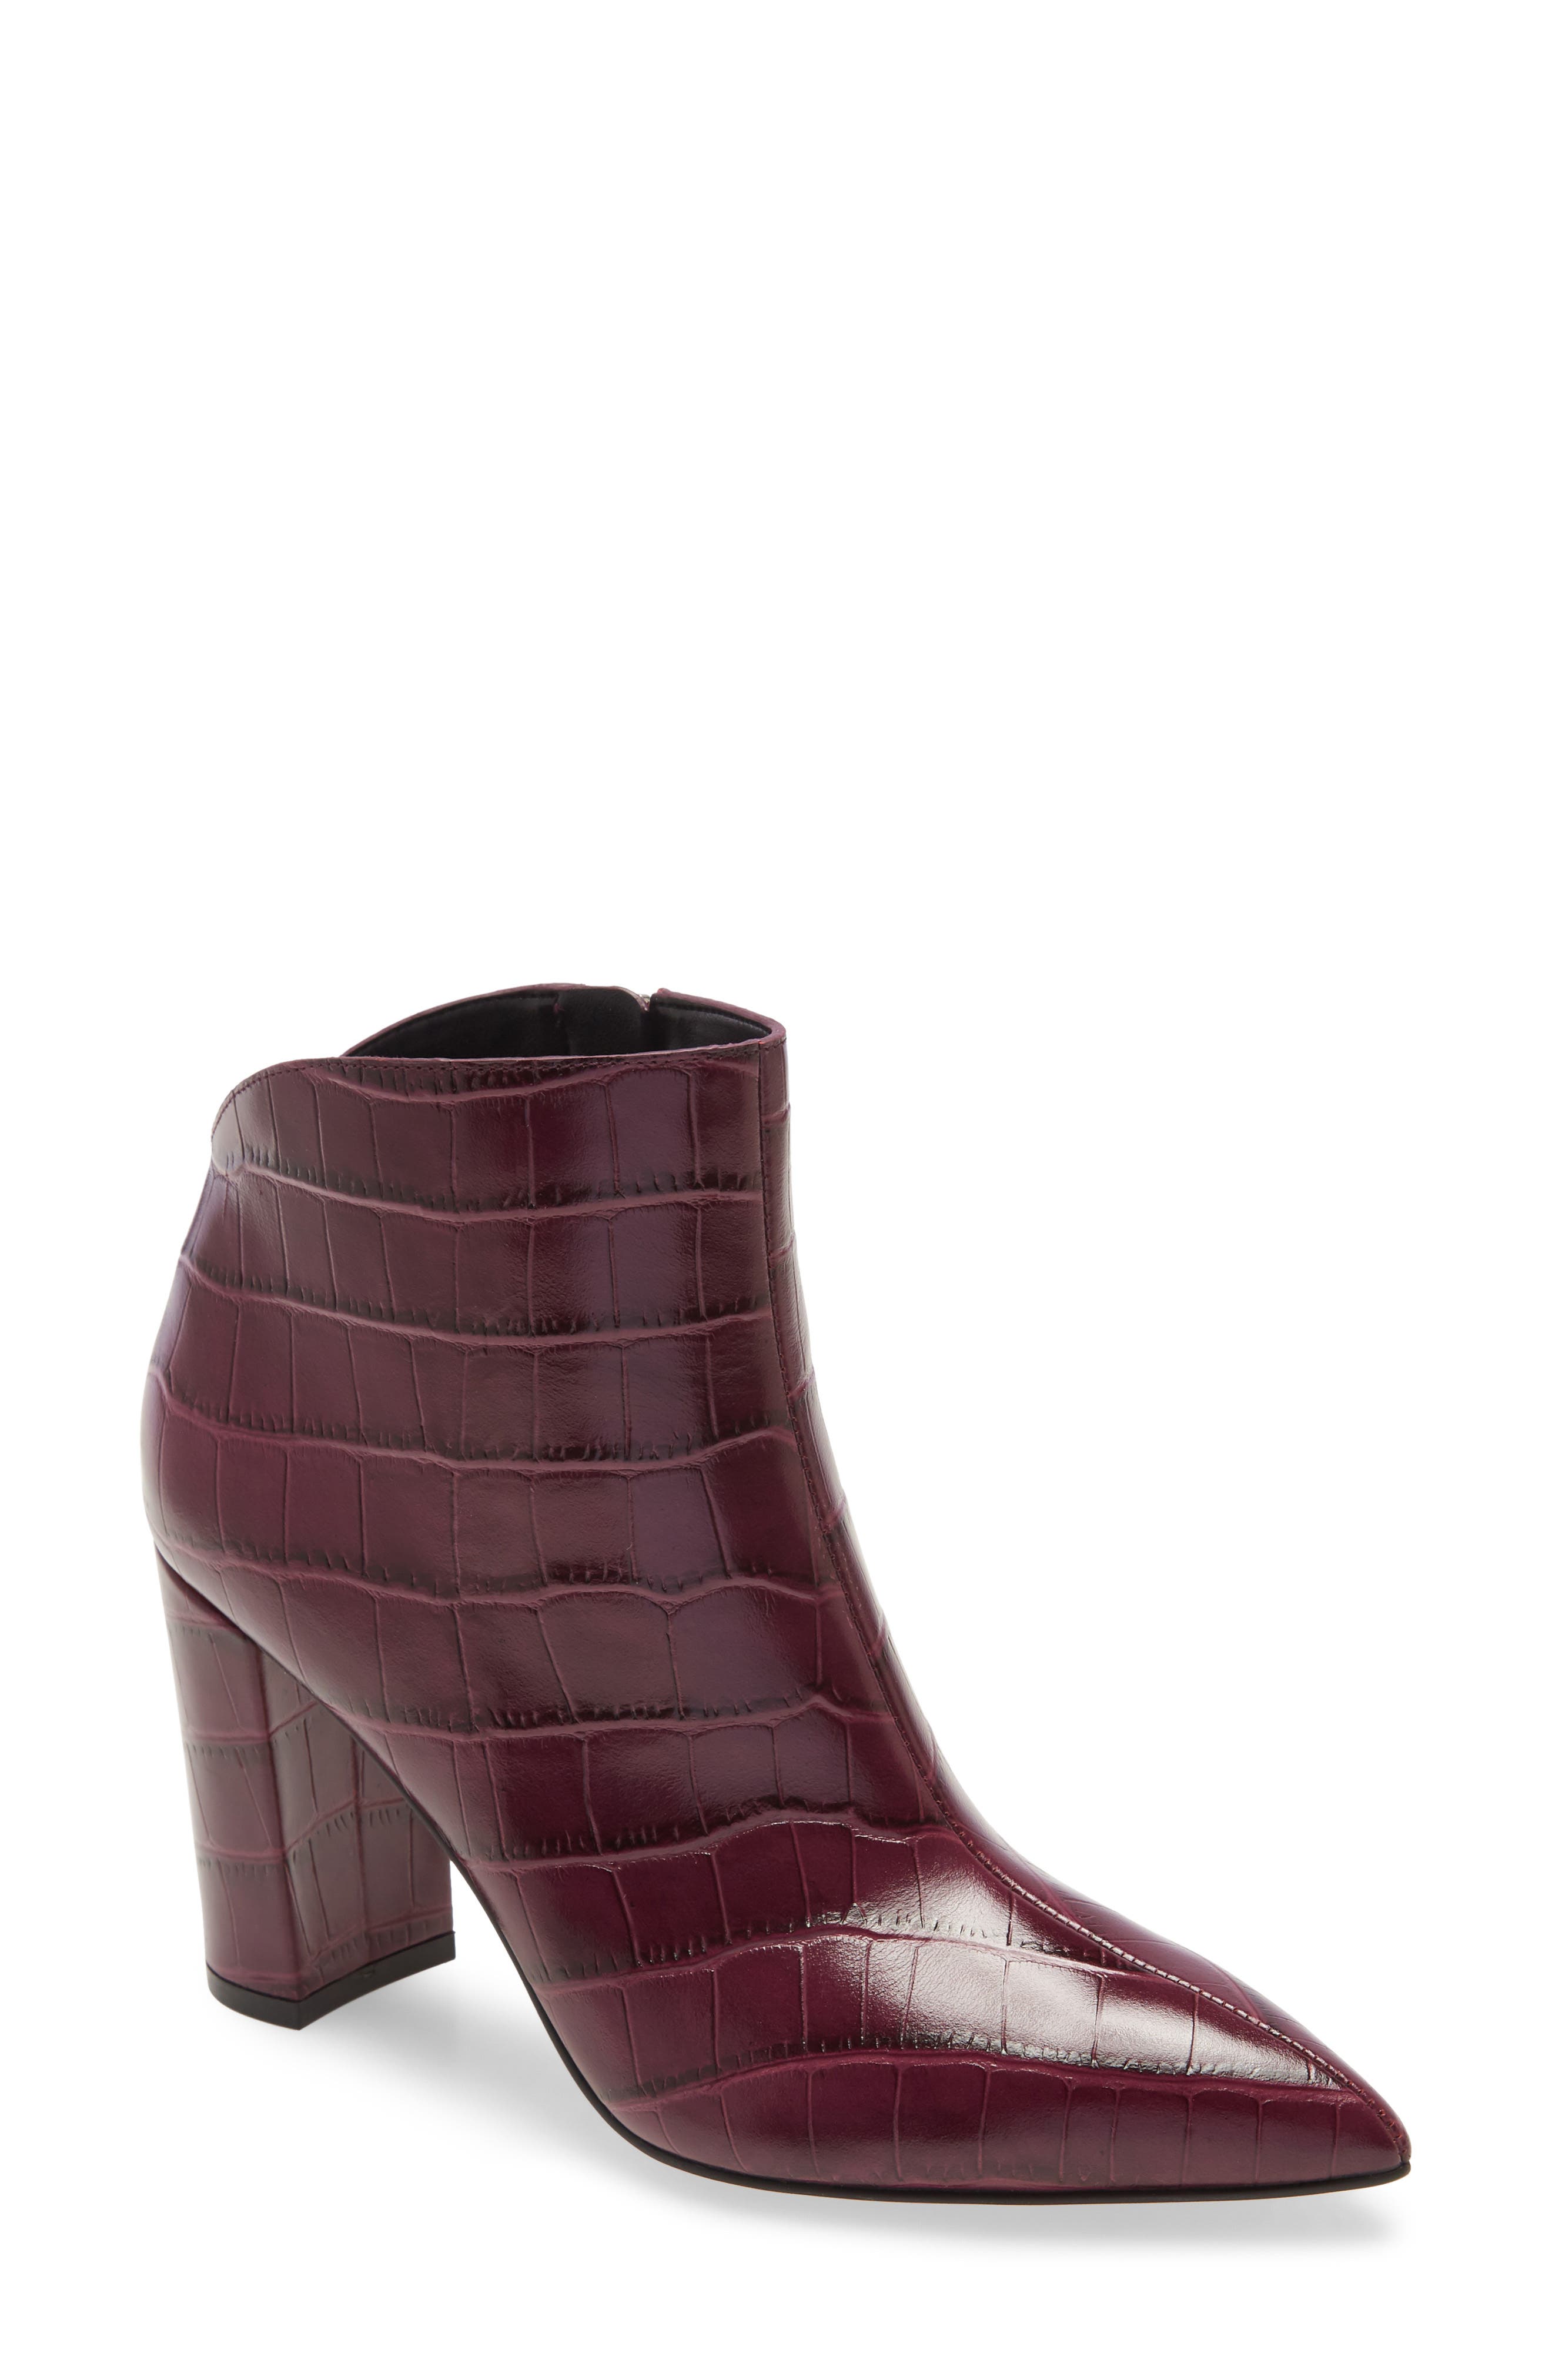 wine leather booties